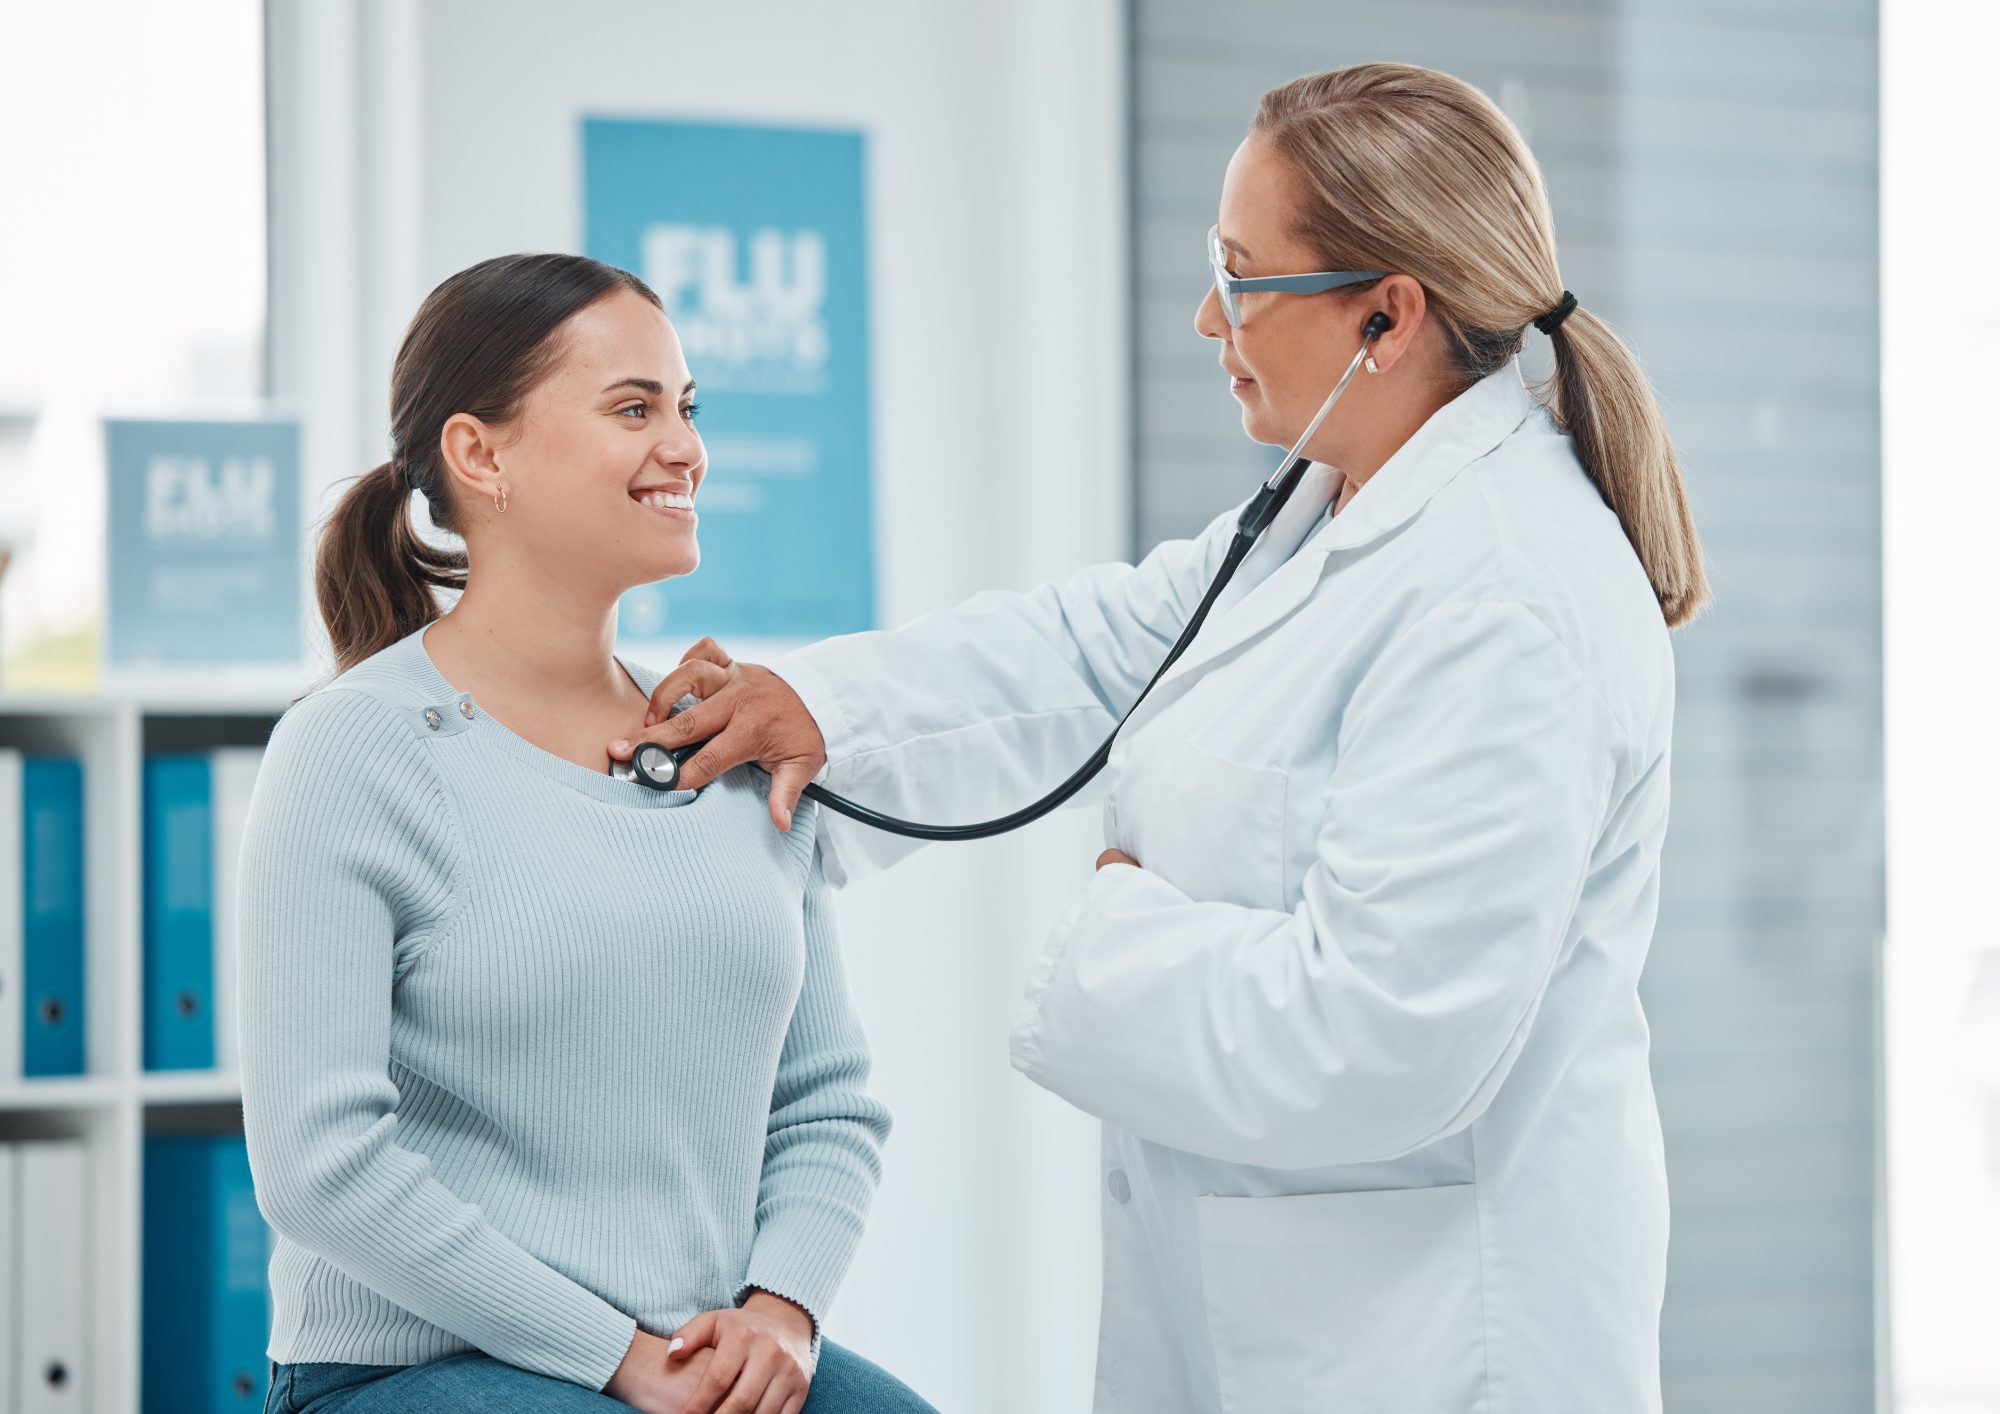 A doctor examining a patient with a stethoscope 